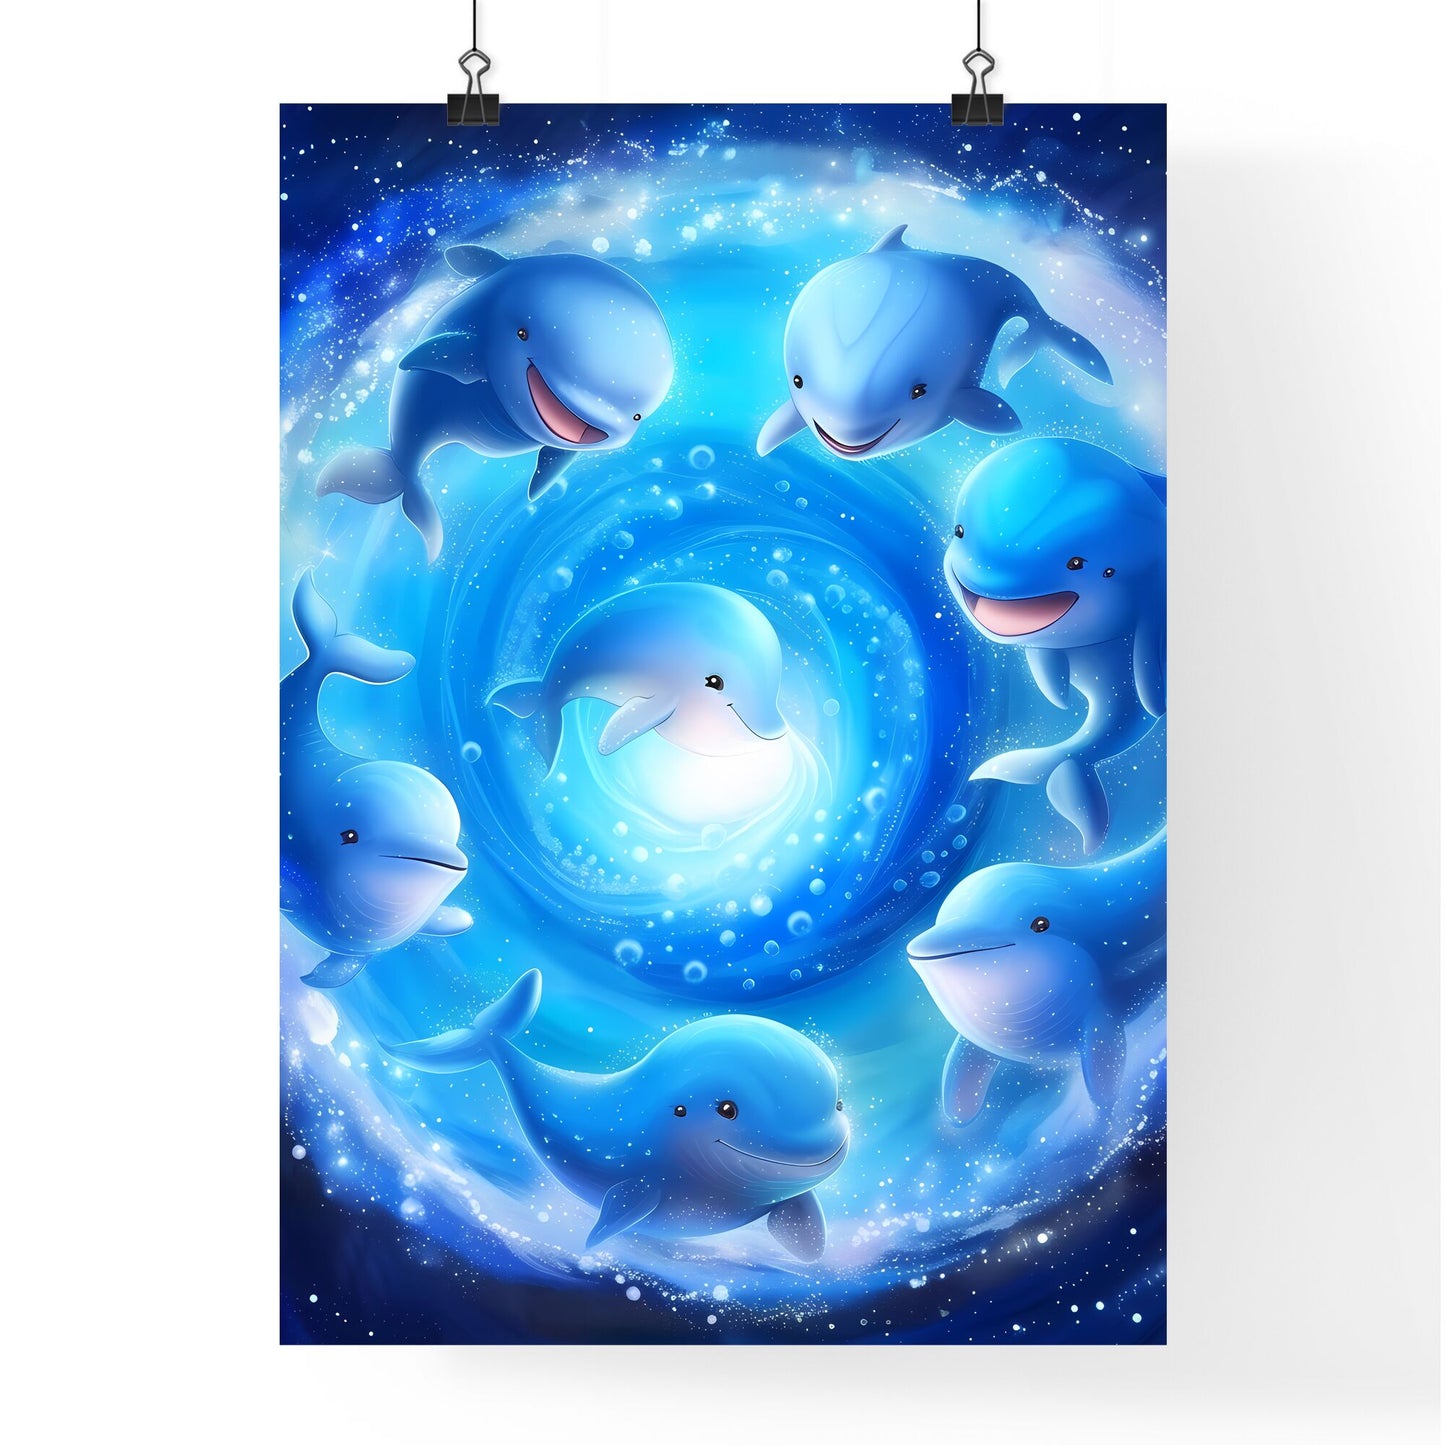 Smiling cute cartoon whales in different poses, swimming in a swirl - Art print of a group of blue dolphins in a circle Default Title